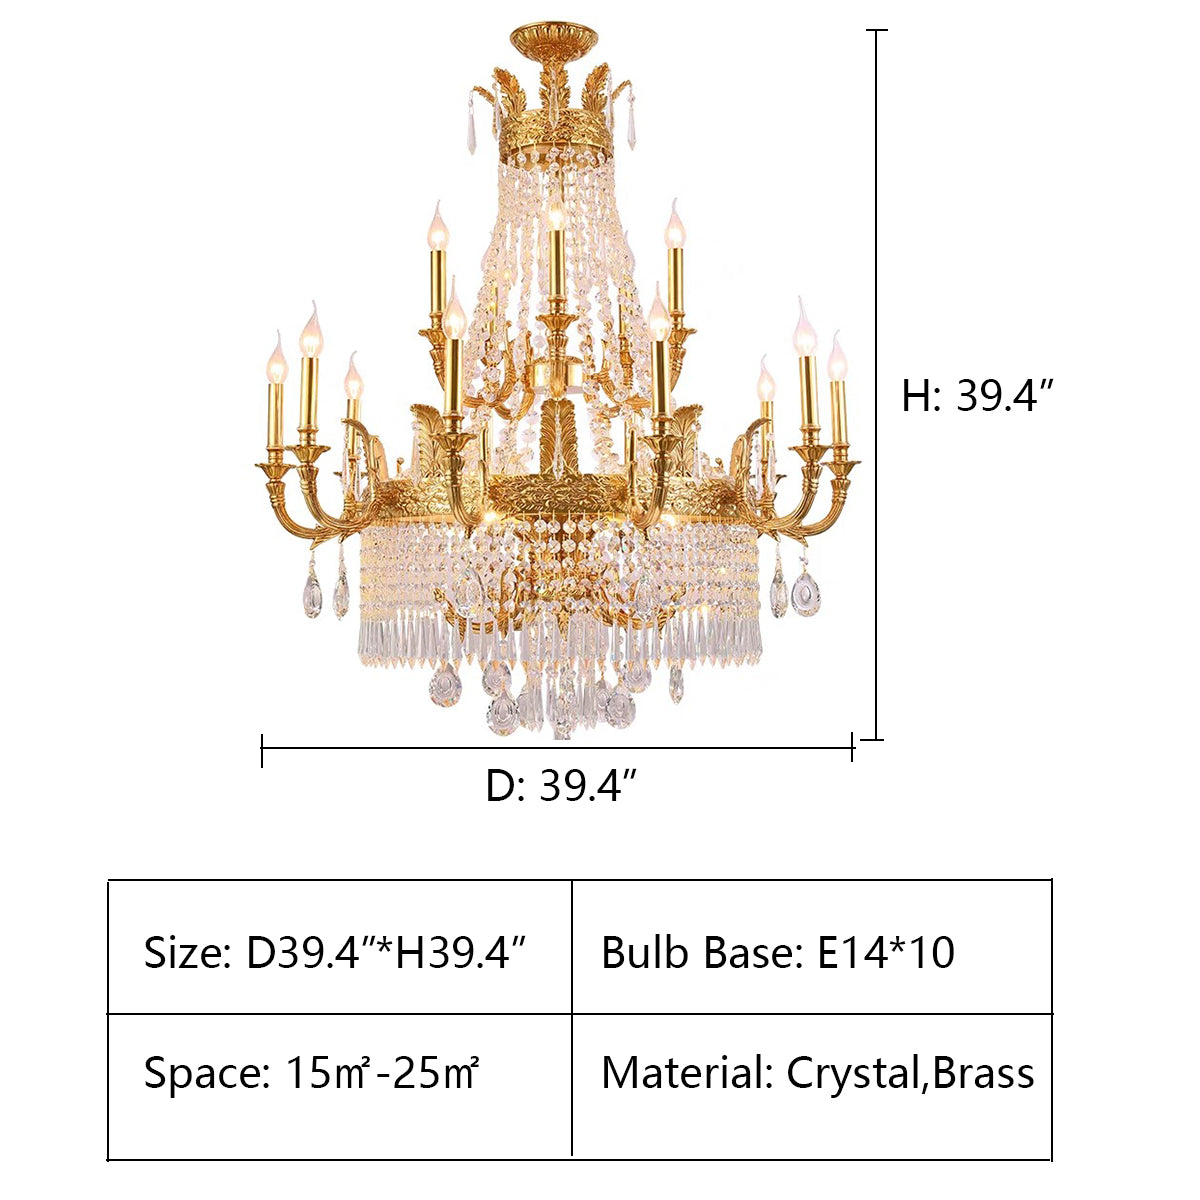 Stunning Oversized Luxury Golden Metal CanMLe Crystal Tassel Chandelier  For High-ceiling Staircase/Entryway/Living/Meeting Room